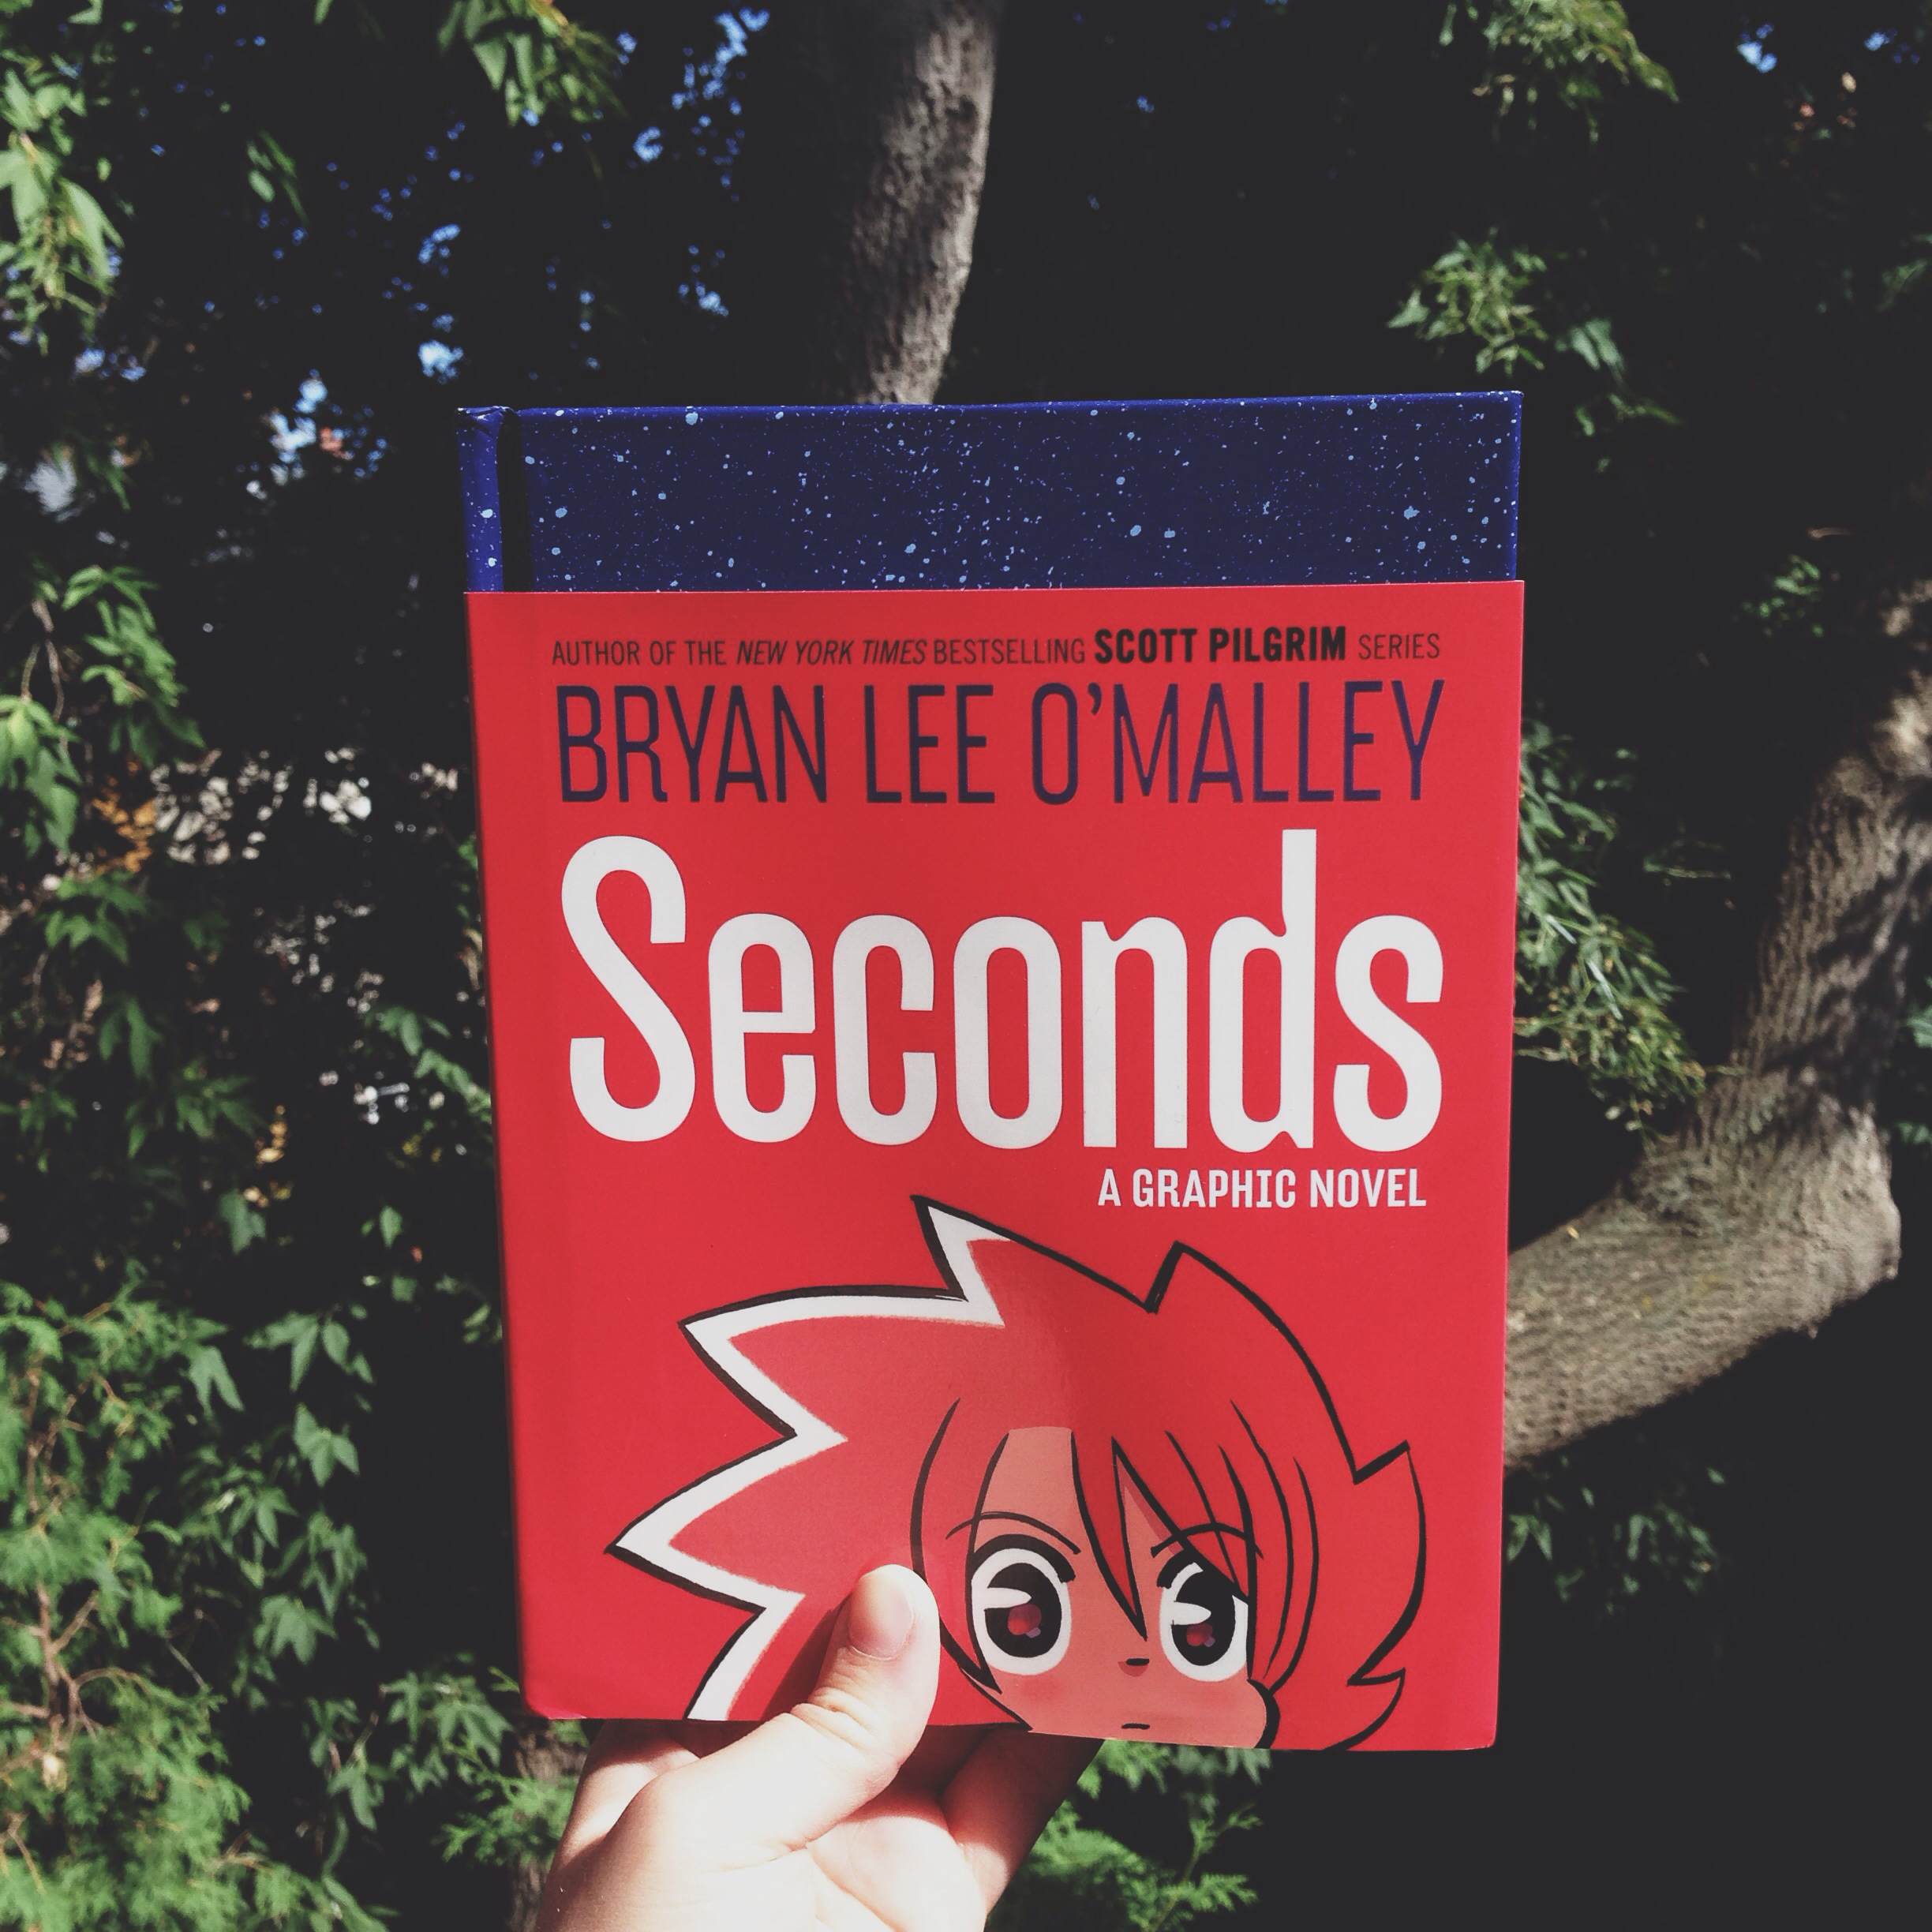 Book review: Seconds by Bryan Lee O'Malley - The Paper Trail Diary